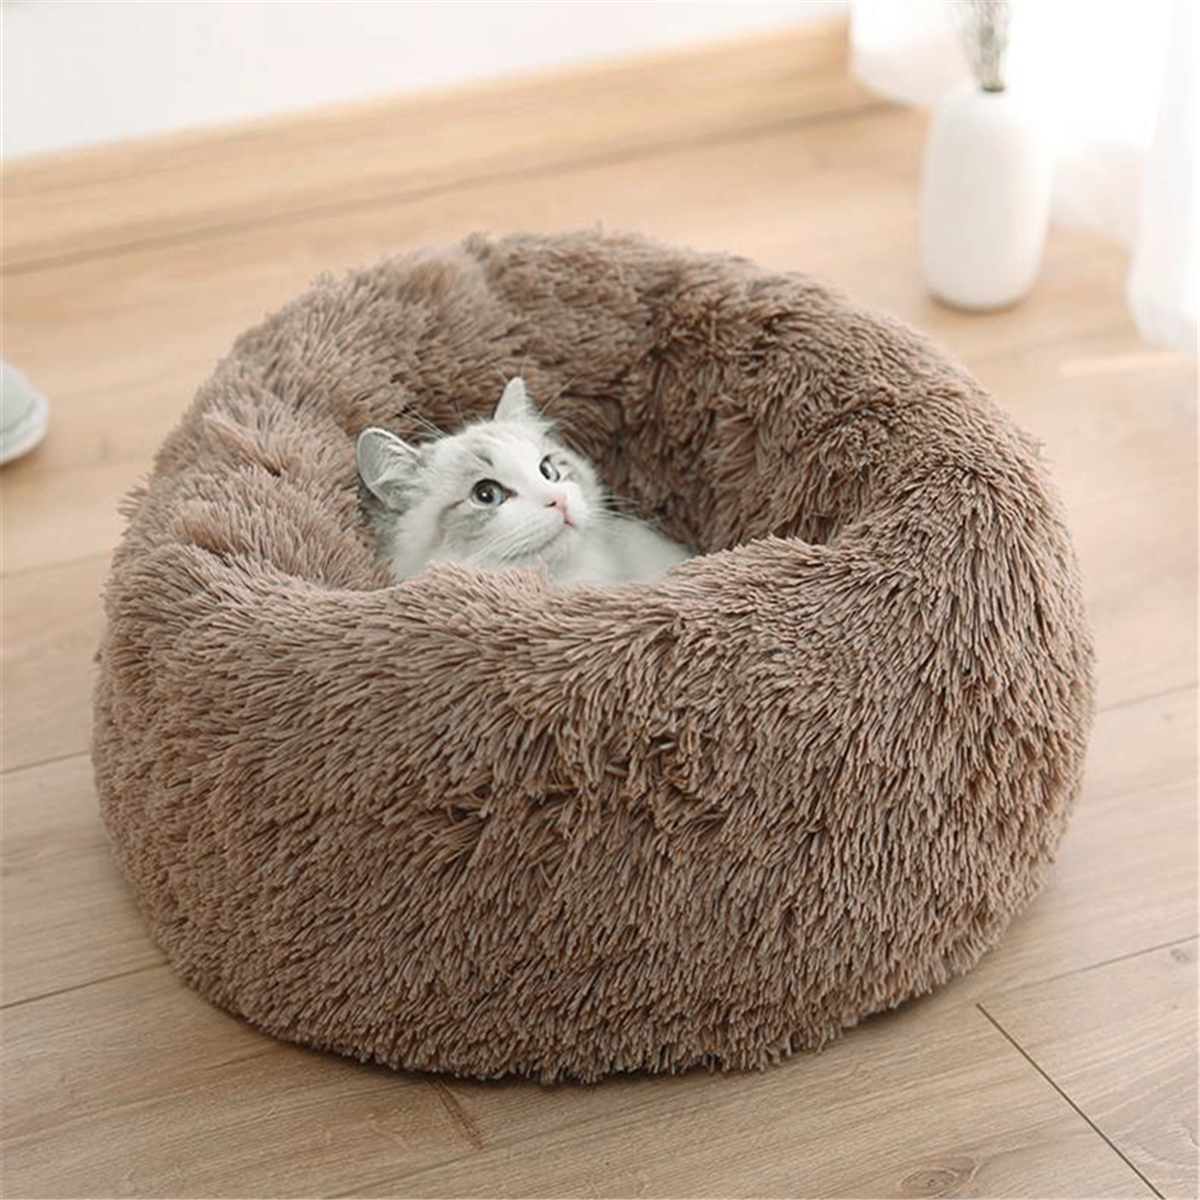 4-Size-Dog-Cat-Round-Bed-Sleeping-Bed-Plush-Pet-Bed-Kennel-Sleeping-Cushion-Puppy-1475650-1